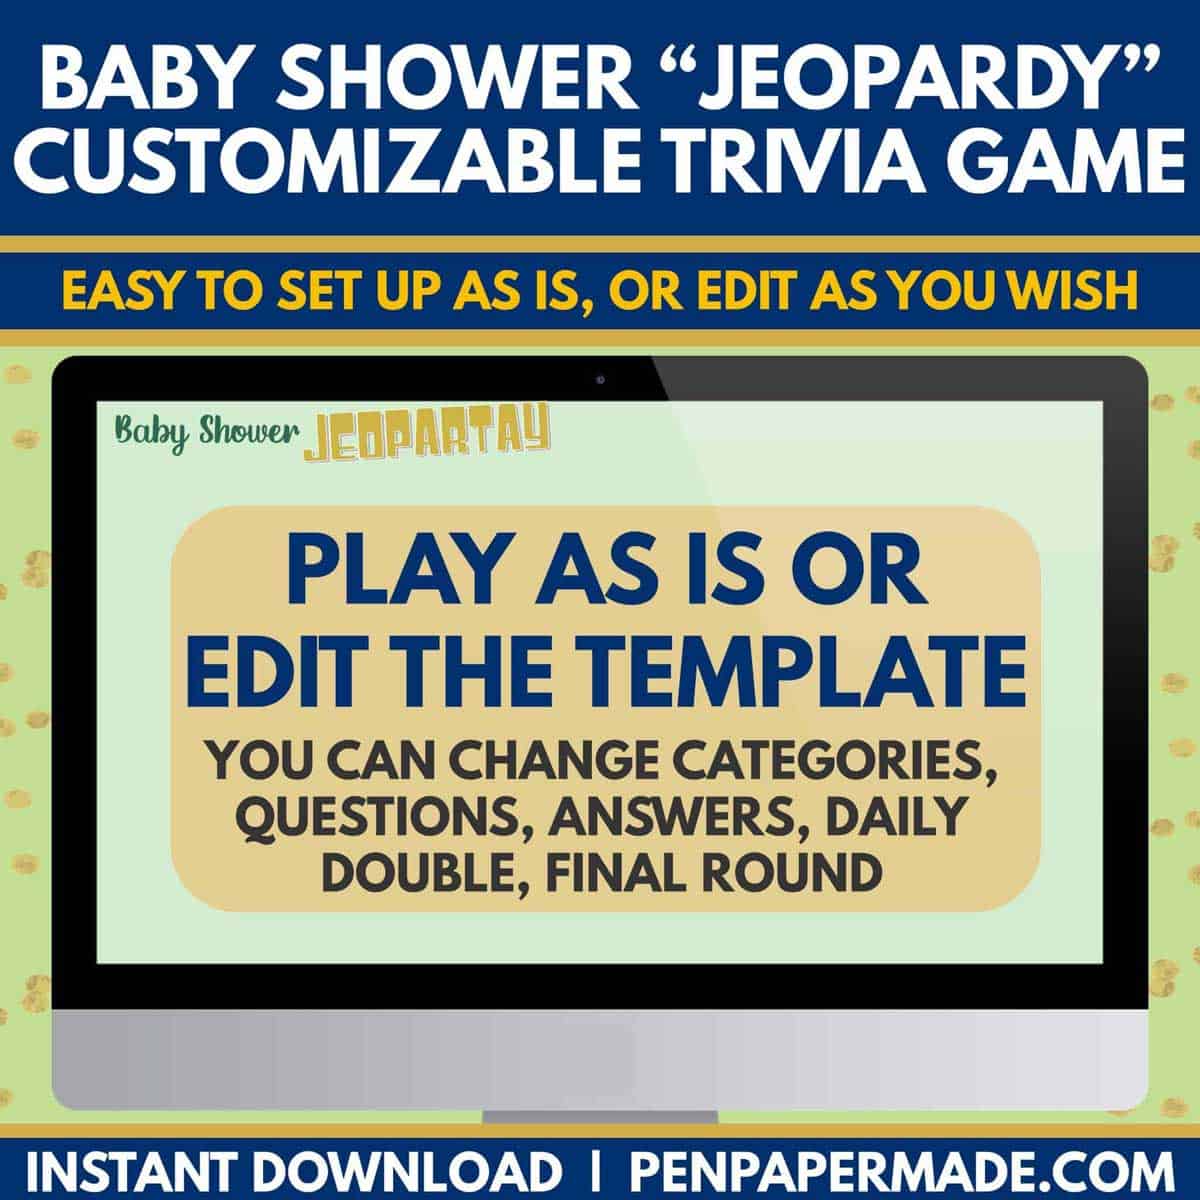 pre-loaded green baby shower jeopardy questions to play as is or edit template with own questions.